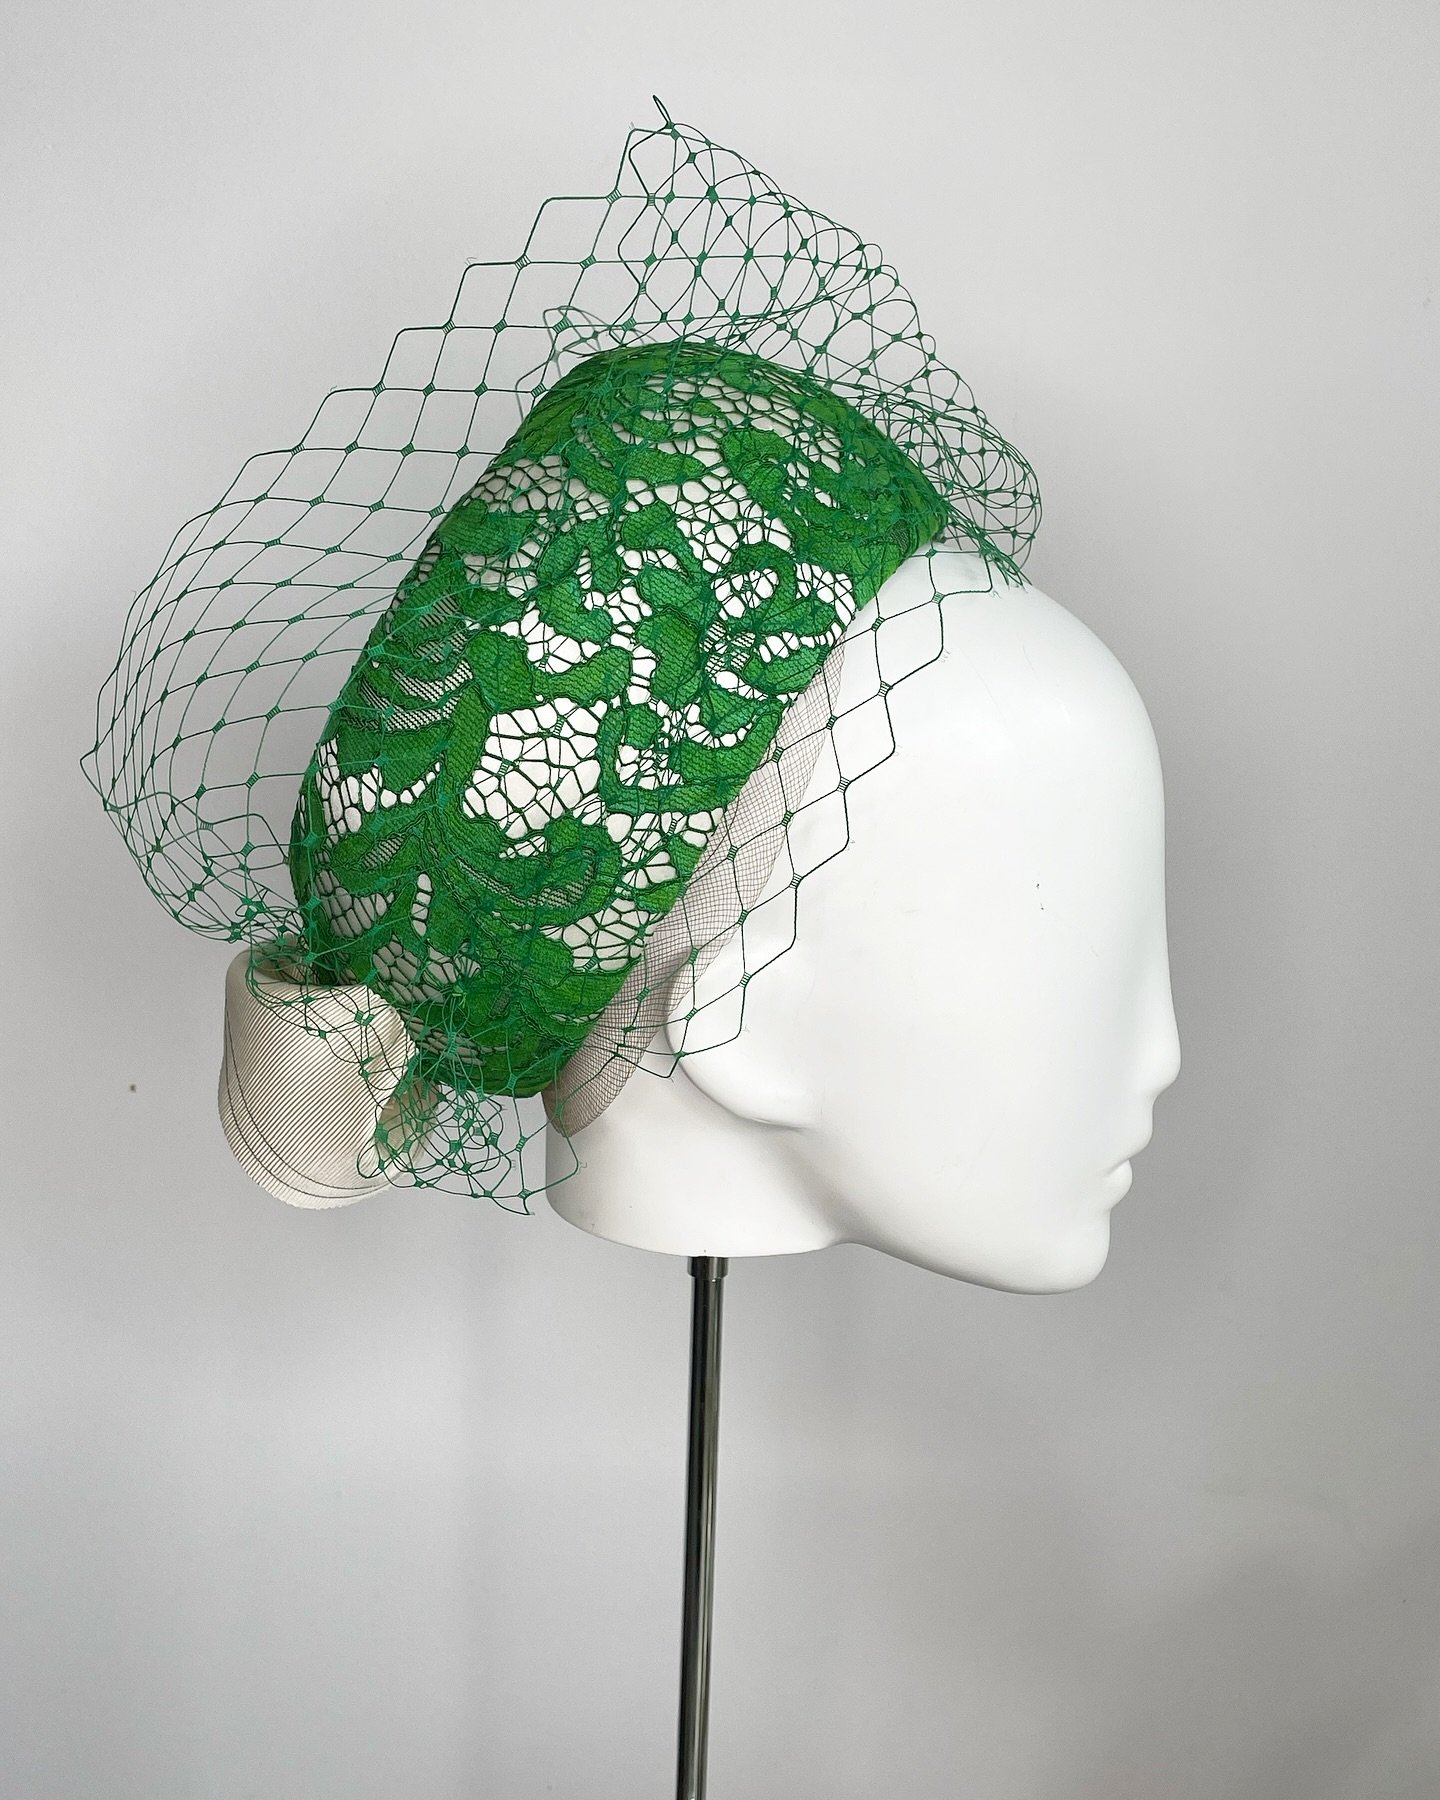 Channelling A Jackie - O in Green.

#greenhat ##millinery #hats #melbournemilliner #melbournecup #racehats #racefashion #hatsfortheraces #fashion #trend #headbands #fascinators #headwear